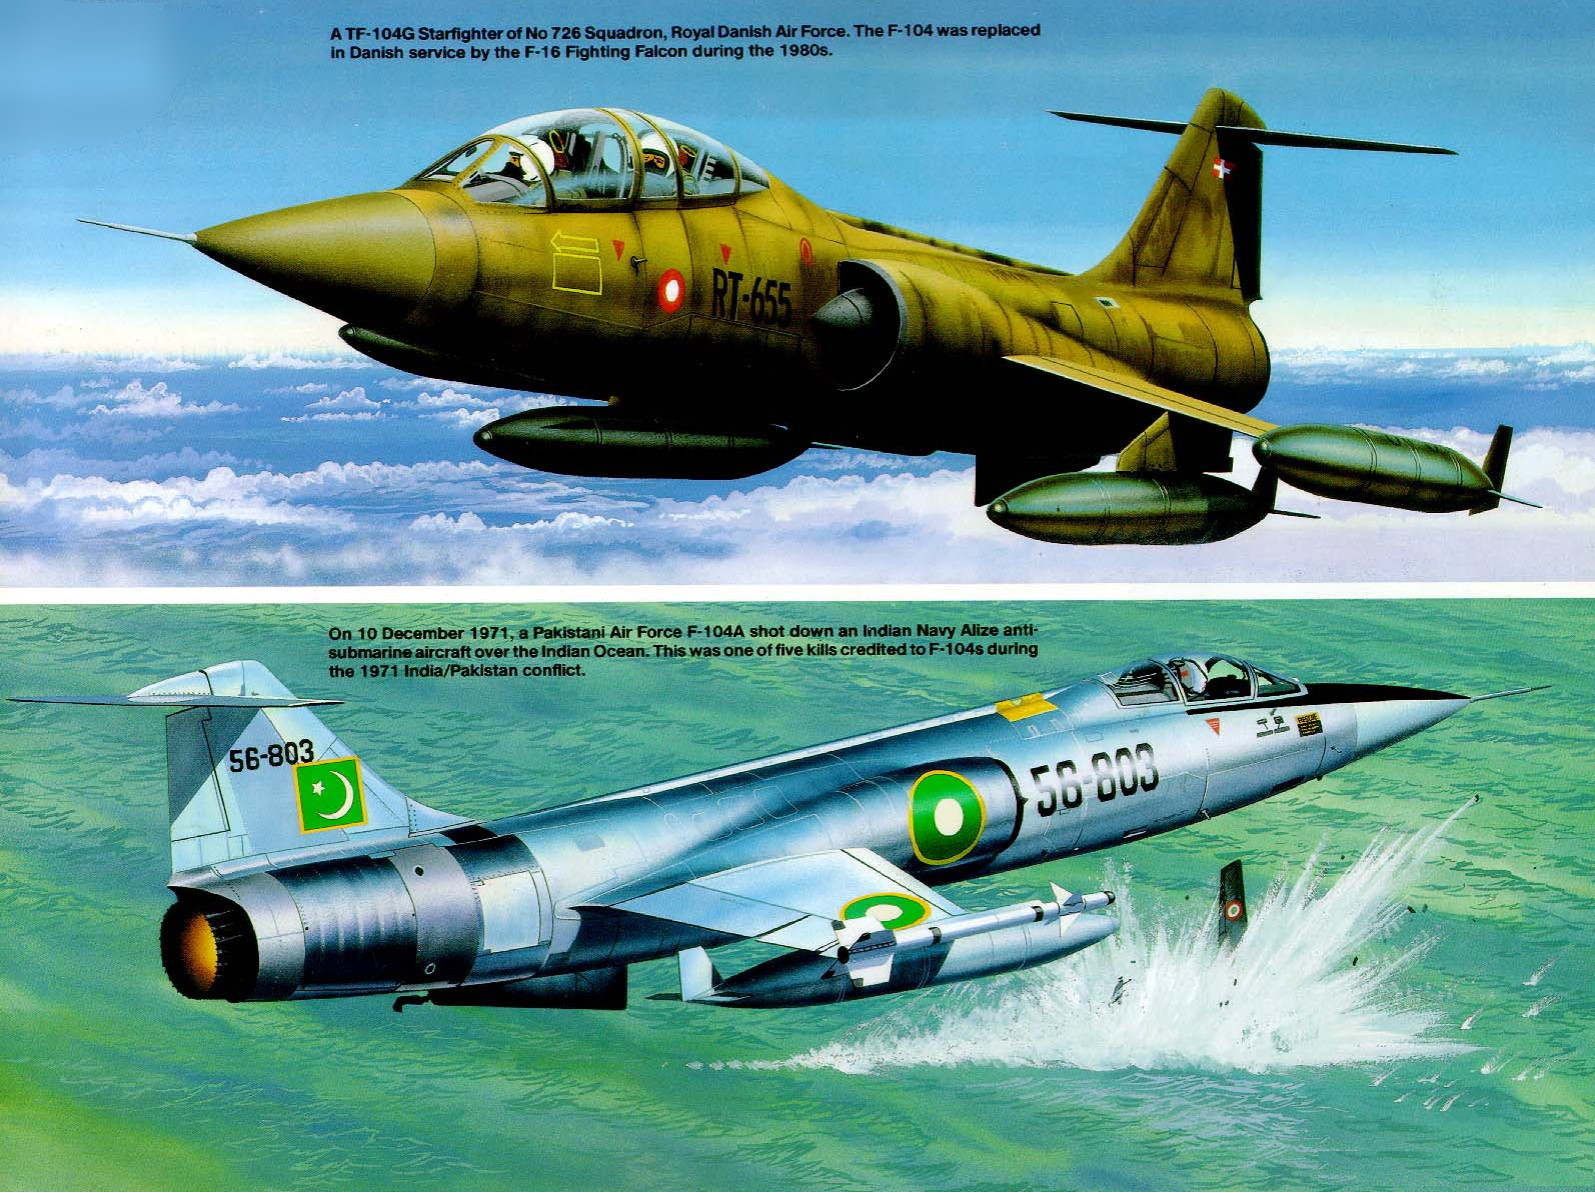 Variants of the ‘Man in the Missile Starfighter